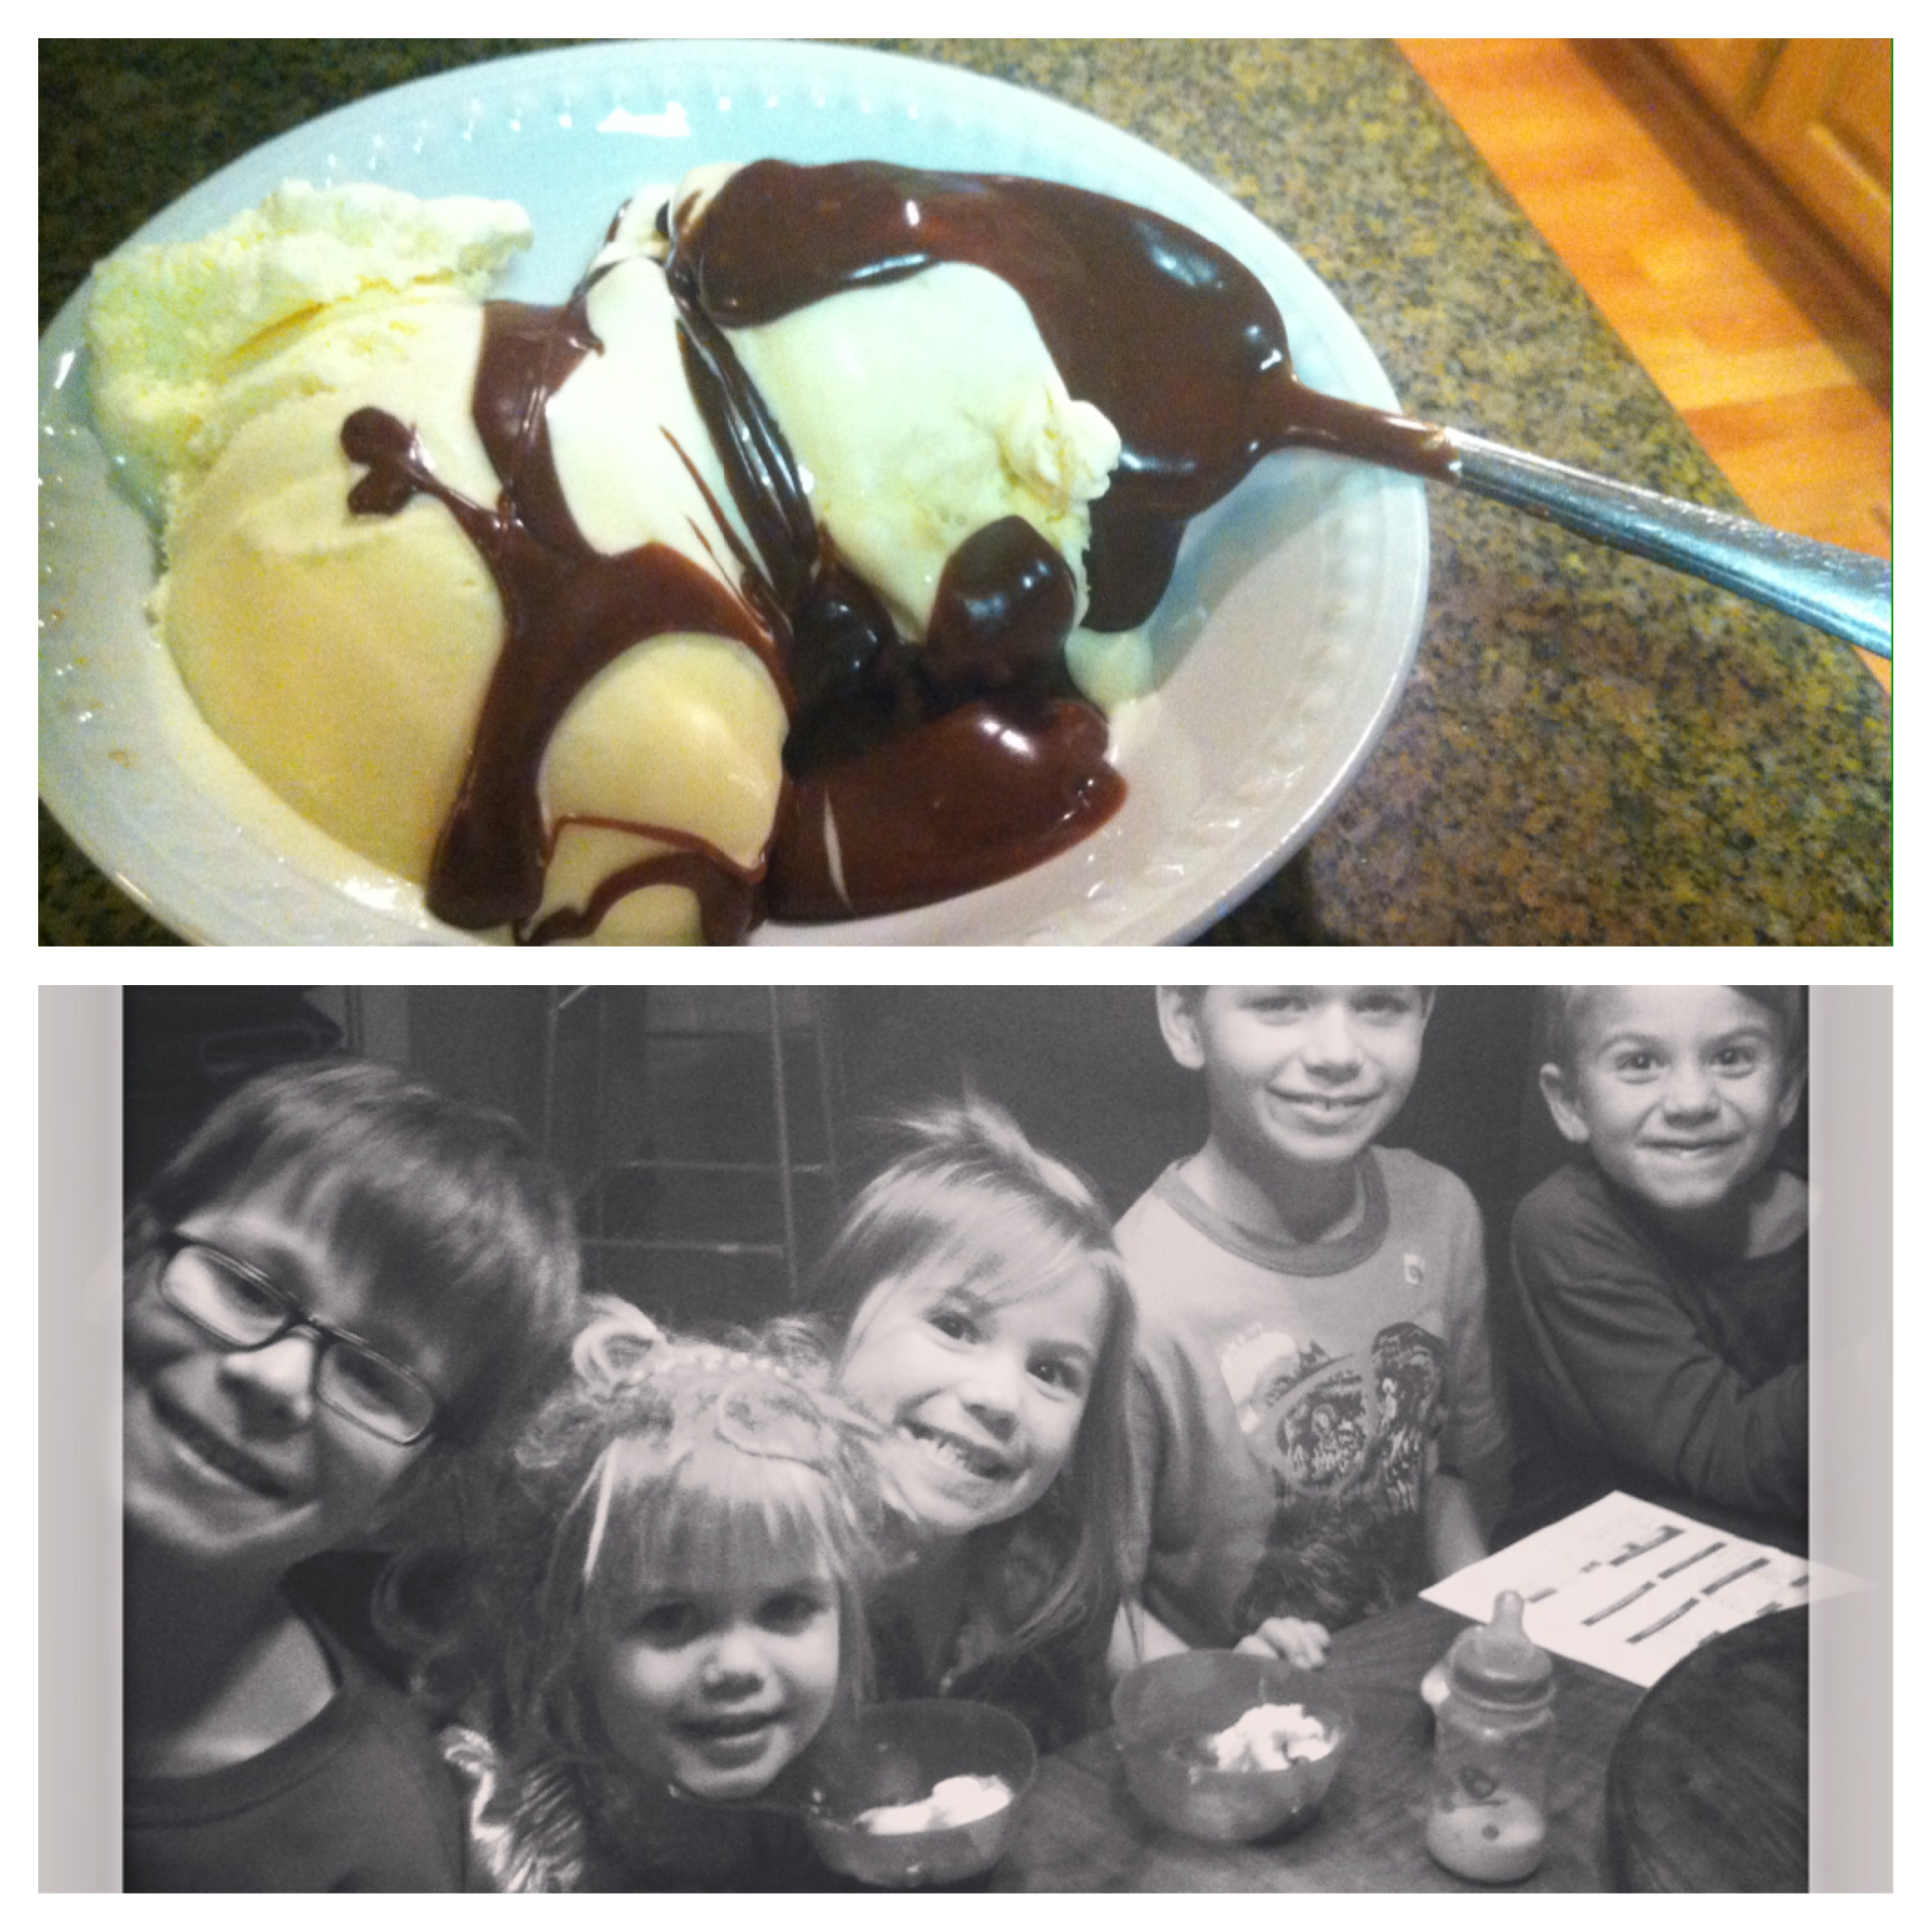 To reheat, microwave sauce for 30 seconds, stir and if still needed heat in 10 second intervals.  Pour over ice cream of your choice and enjoy!  PERFECT for a late night snack with your family!! They will think you are the best, hot fudge sundaes instead of bed.... Yes please!